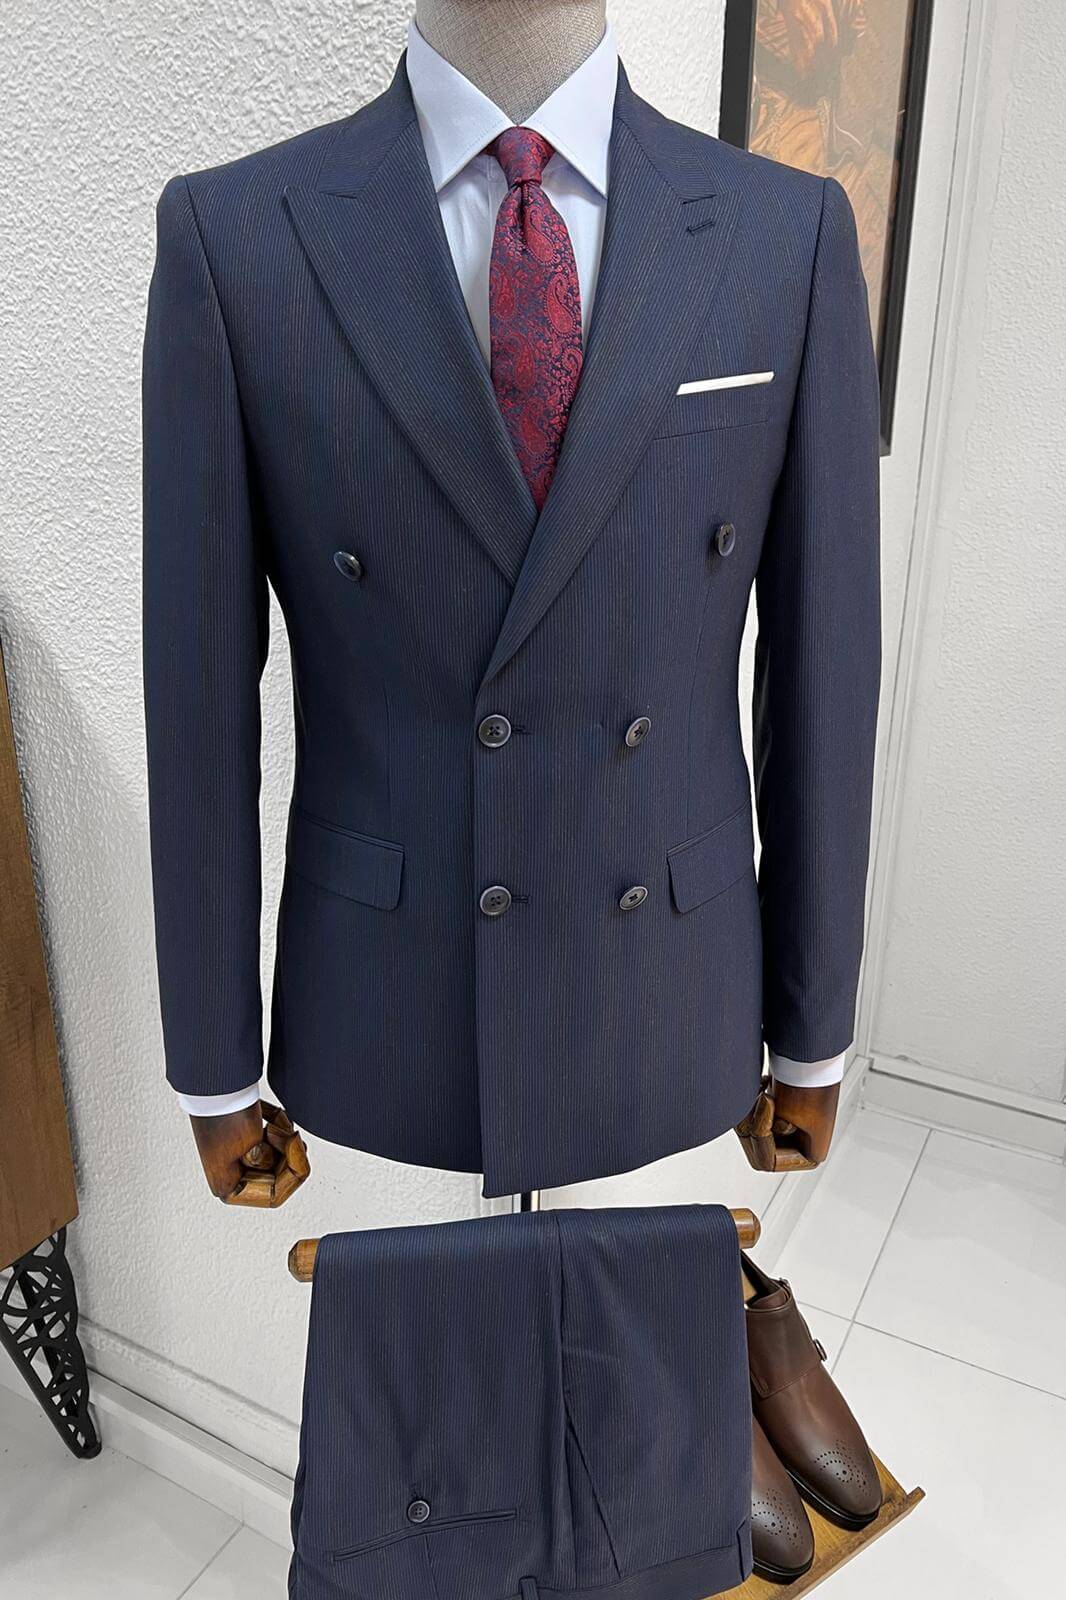 A Slim-fit stripped double-breasted Navy Blue wool suit on display